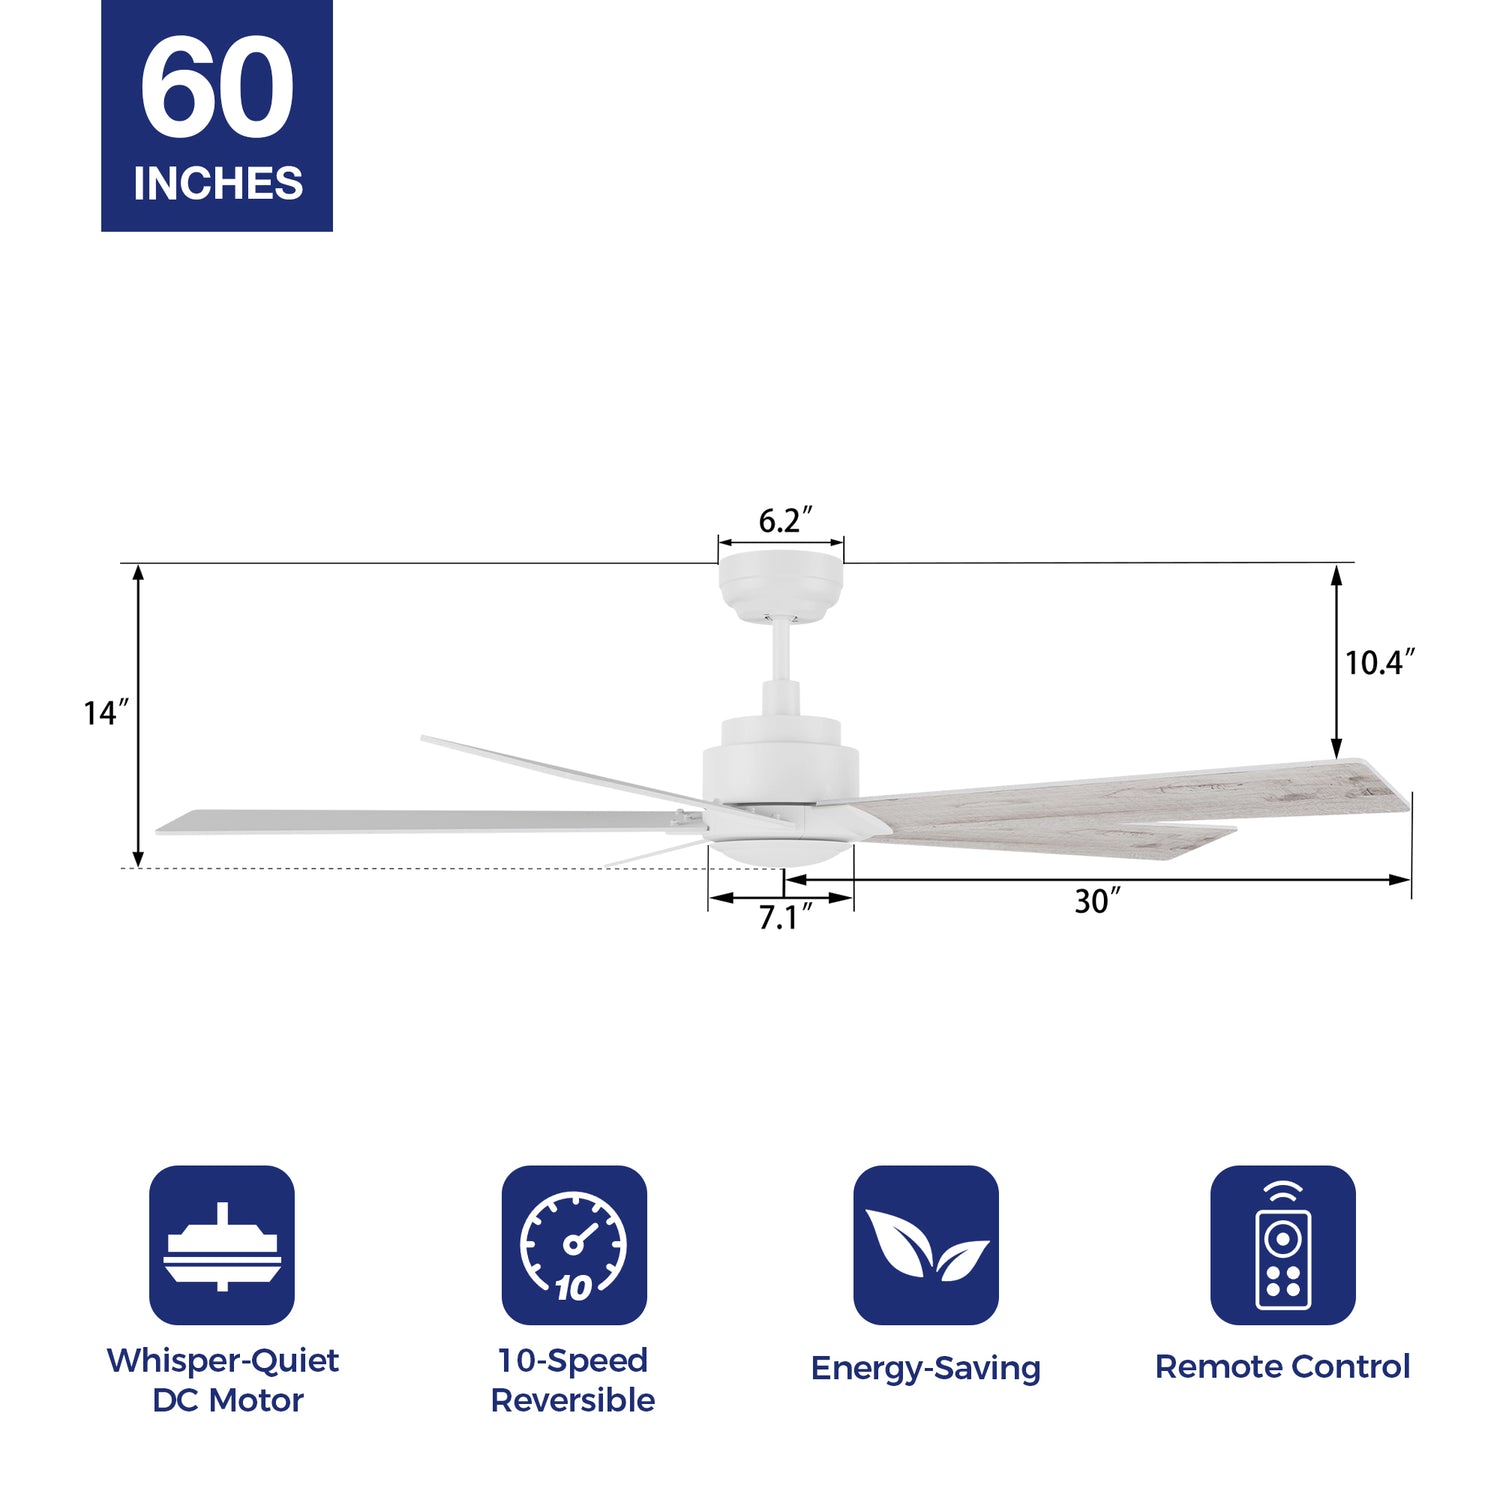 Carro Welland 60-inch ceiling fans with remote, featuring with 10-speed dc motor, whisper-quiet and energy-efficient. 